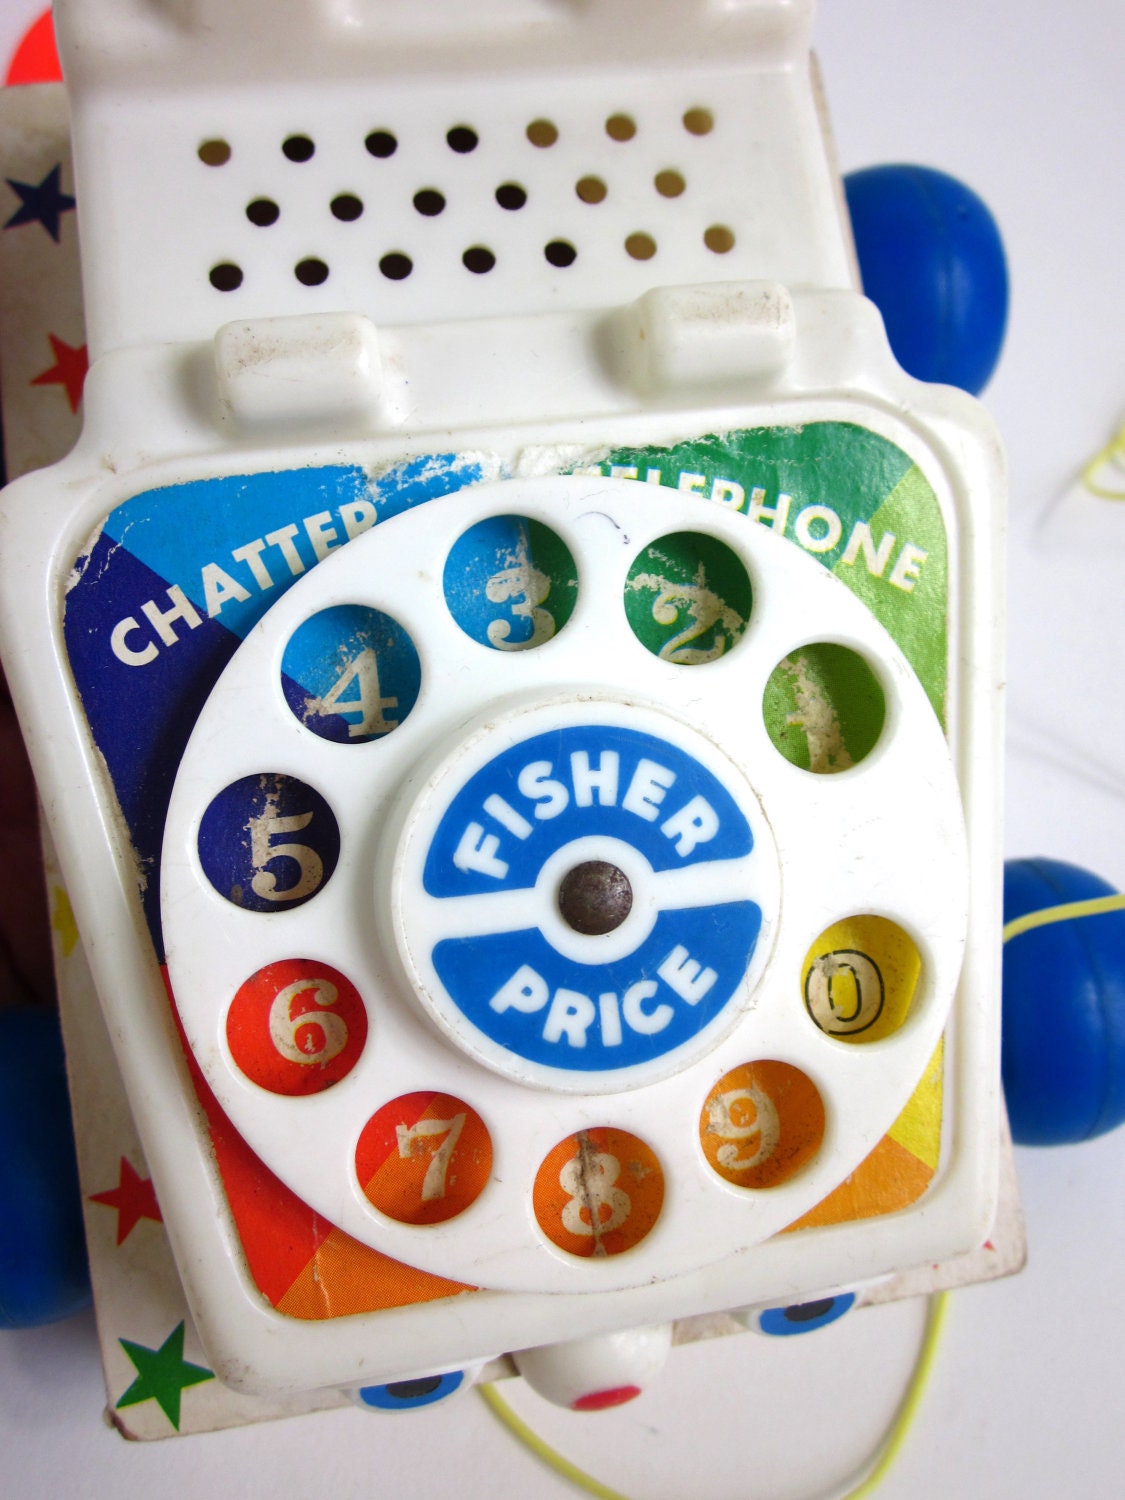 Fisher Price Chatter Telephone 1961